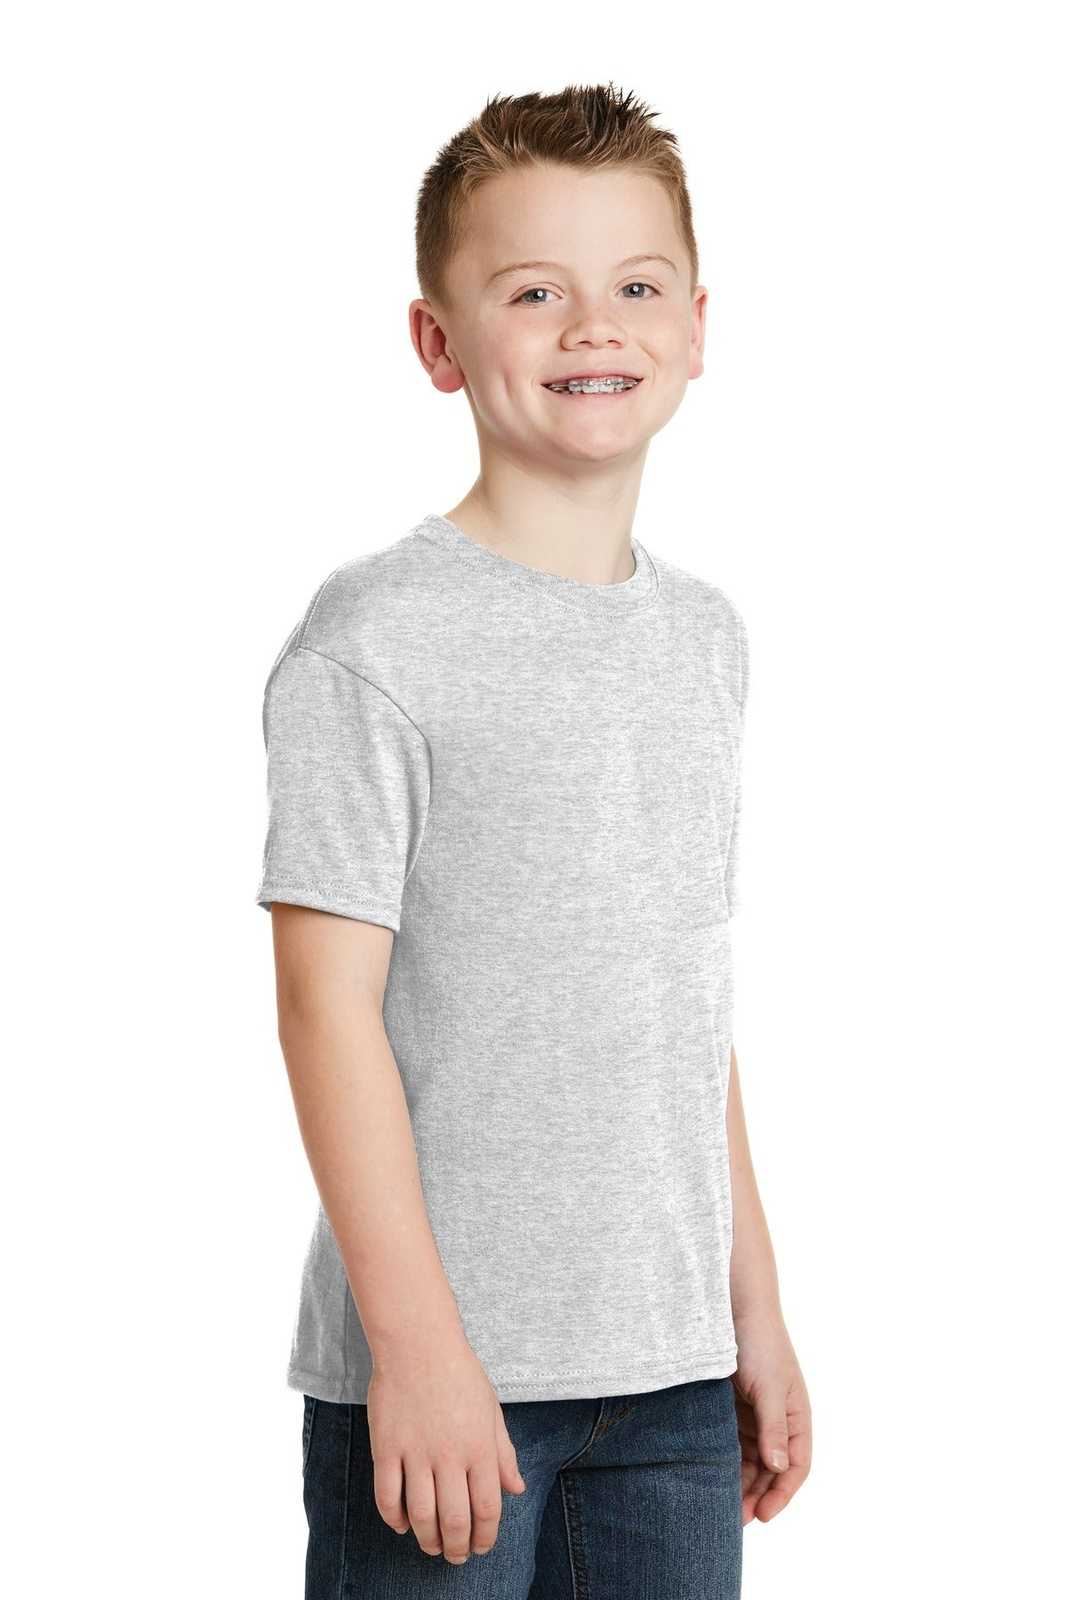 Hanes 5370 Youth Ecosmart 50/50 Cotton/Poly T-Shirt - Ash - HIT a Double